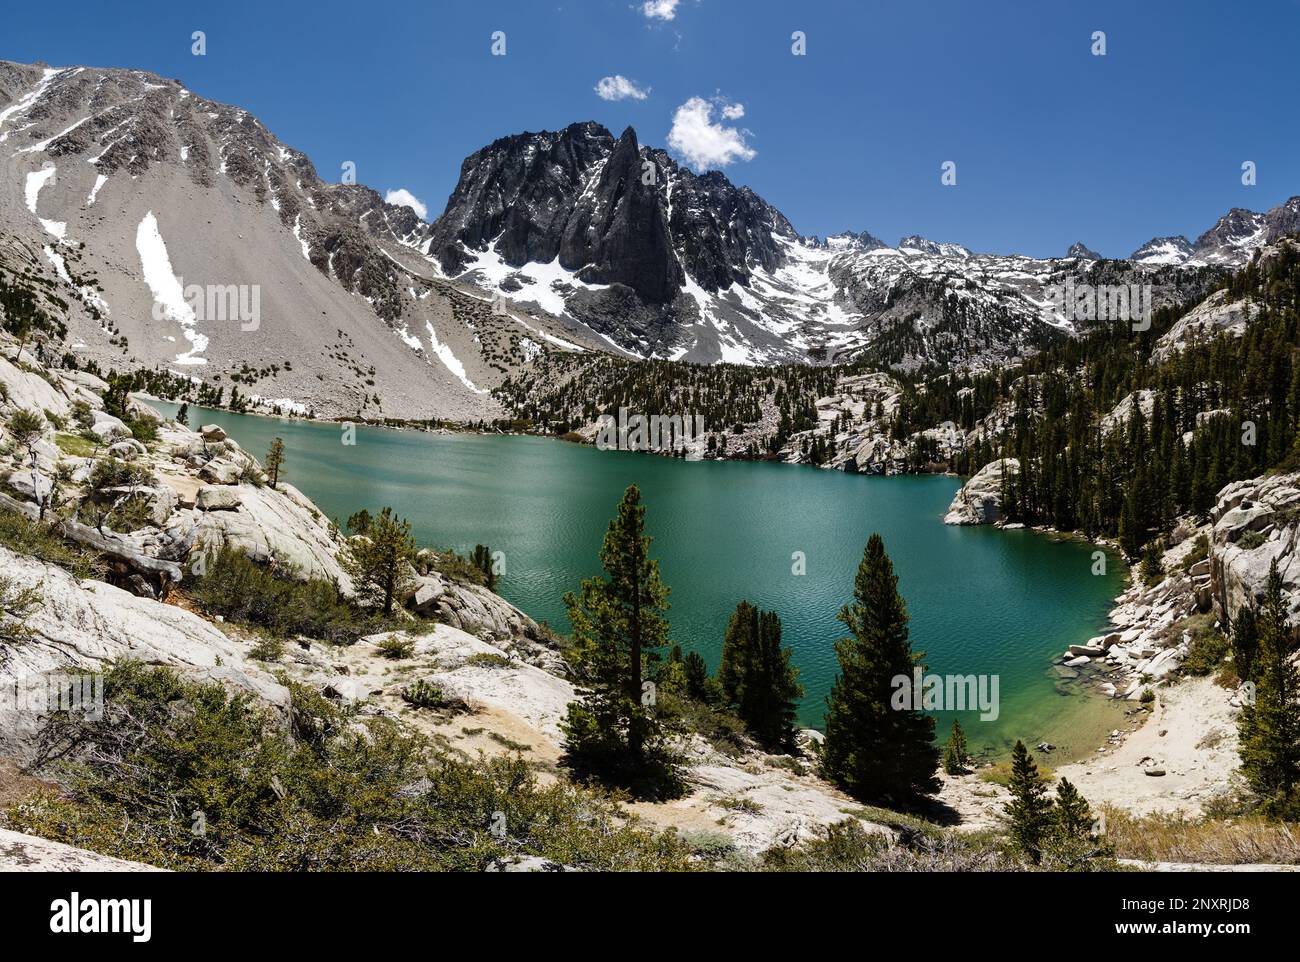 Temple Crag above Second Lake in the north Big Pine Creek drainage near the Palisades of the Sierra Nevada Mountains Stock Photo